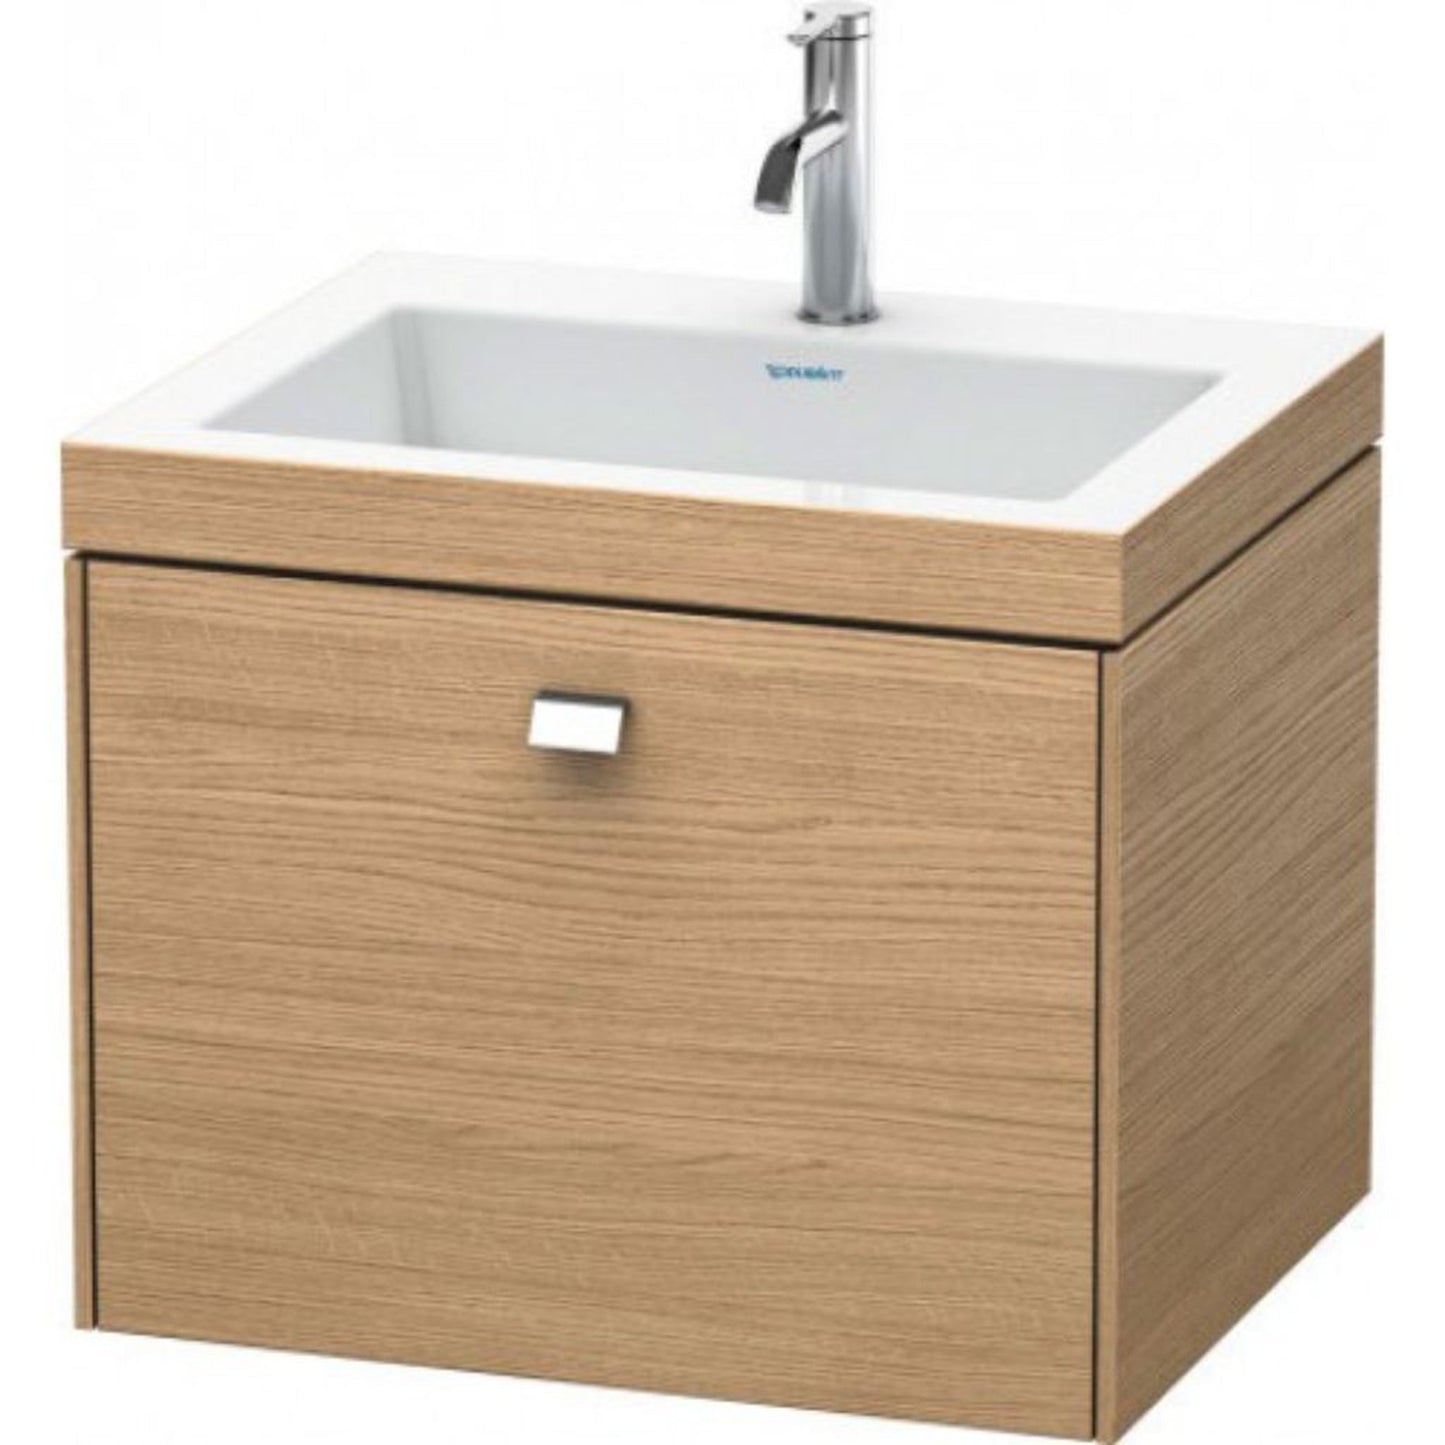 Duravit Brioso 24" x 20" x 19" One Drawer C-Bonded Wall-Mount Vanity Kit With One Tap Hole in European Oak and Chrome Handle